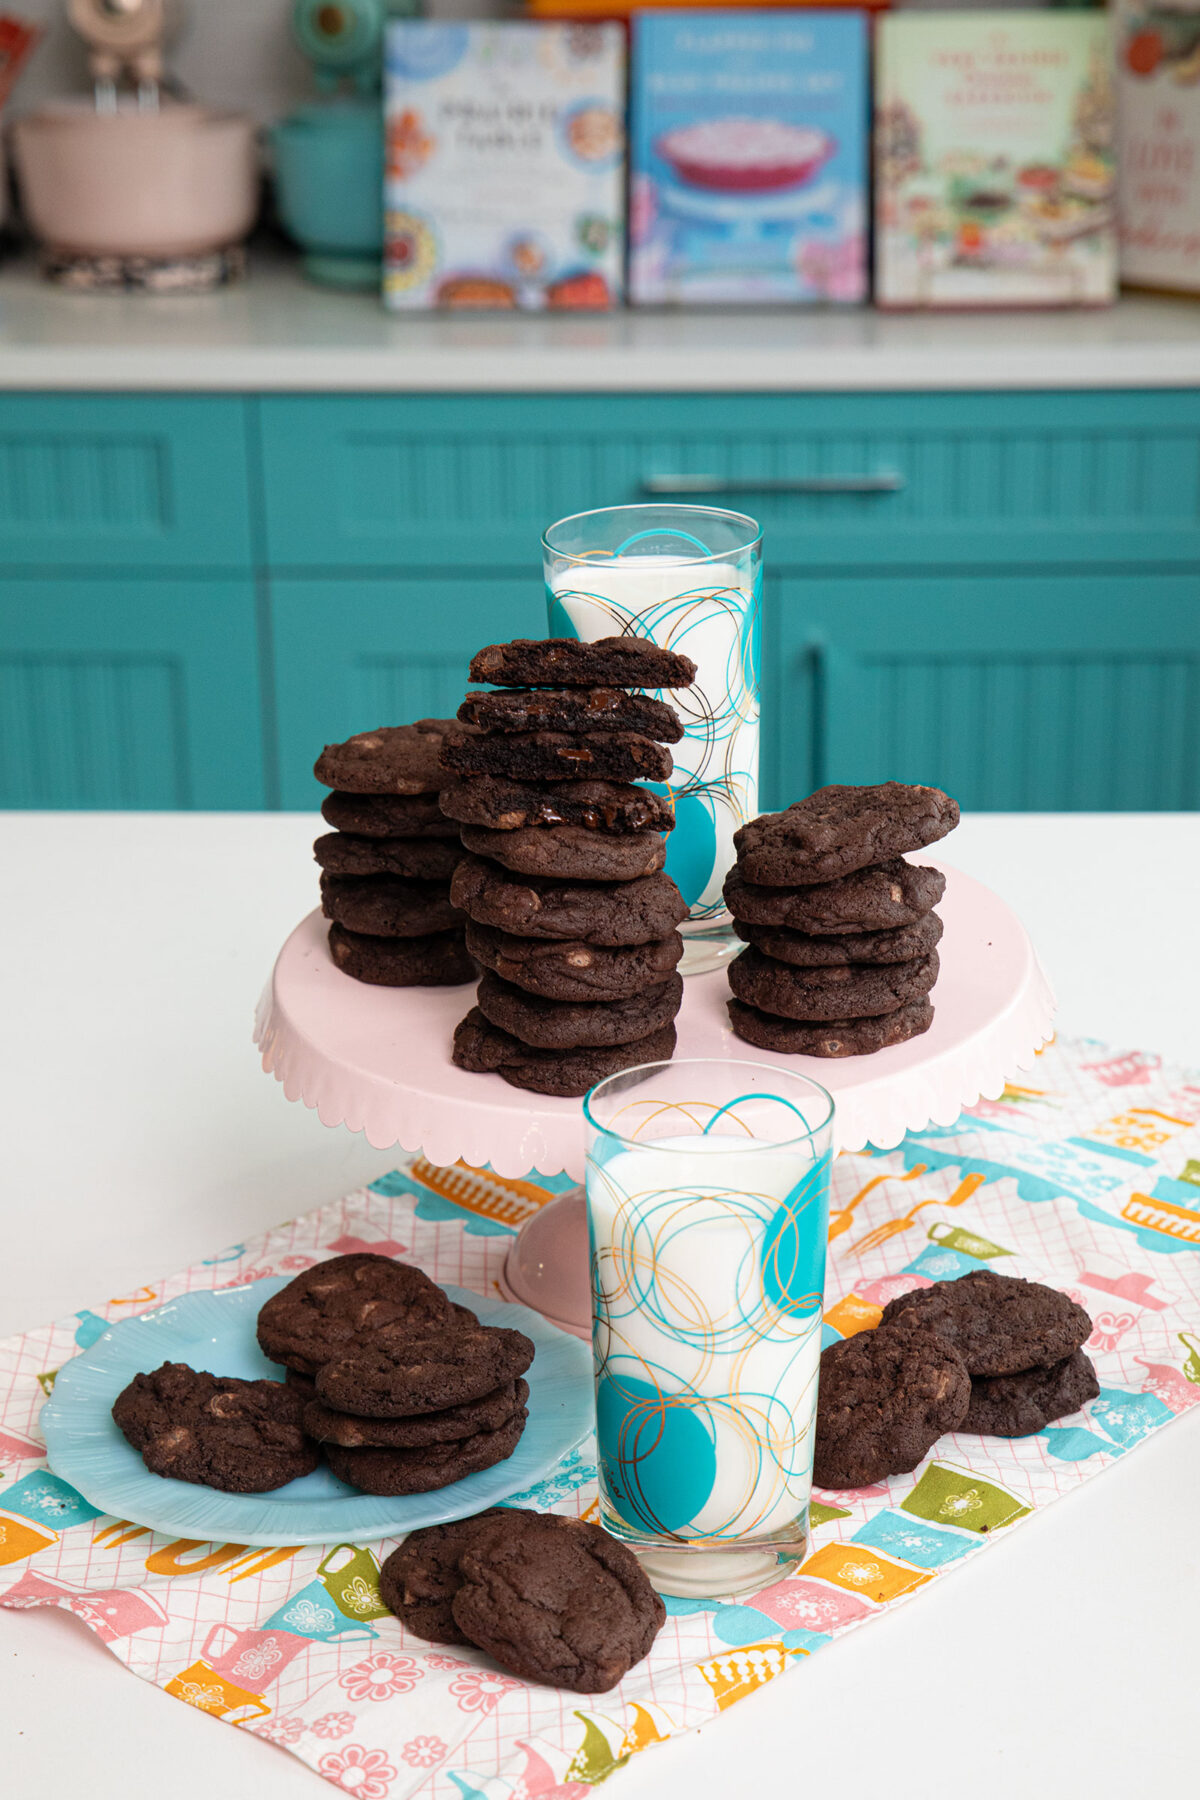 Dark Chocolate Cookies on a blue plate and on a light pink cake stand with a glass of milk.